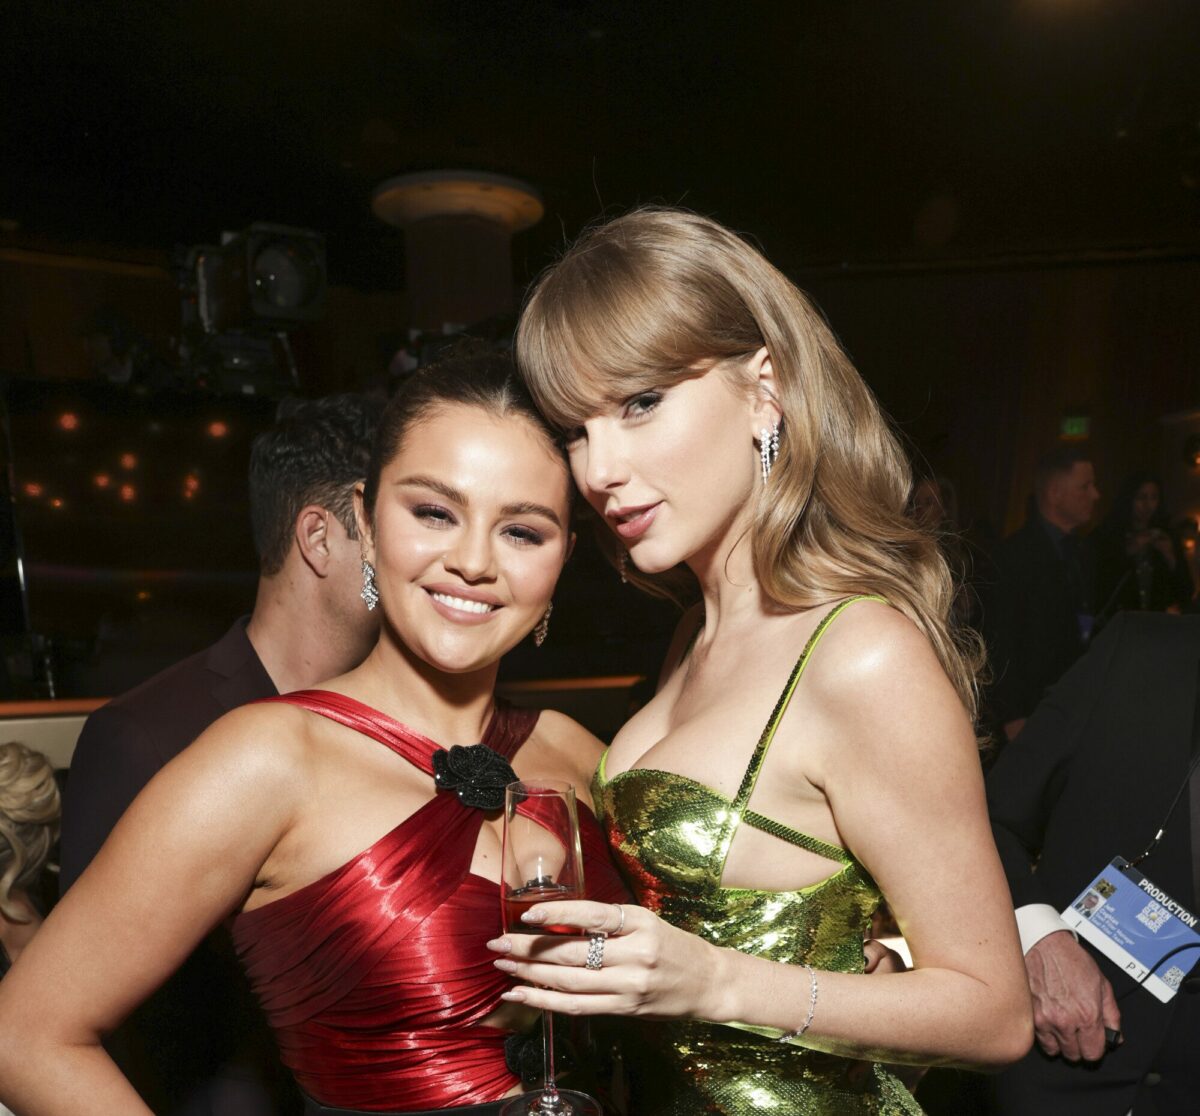 Lip-readers think Taylor Swift and Selena Gomez talked about Kylie Jenner and Timothée Chalamet at the Golden Globes